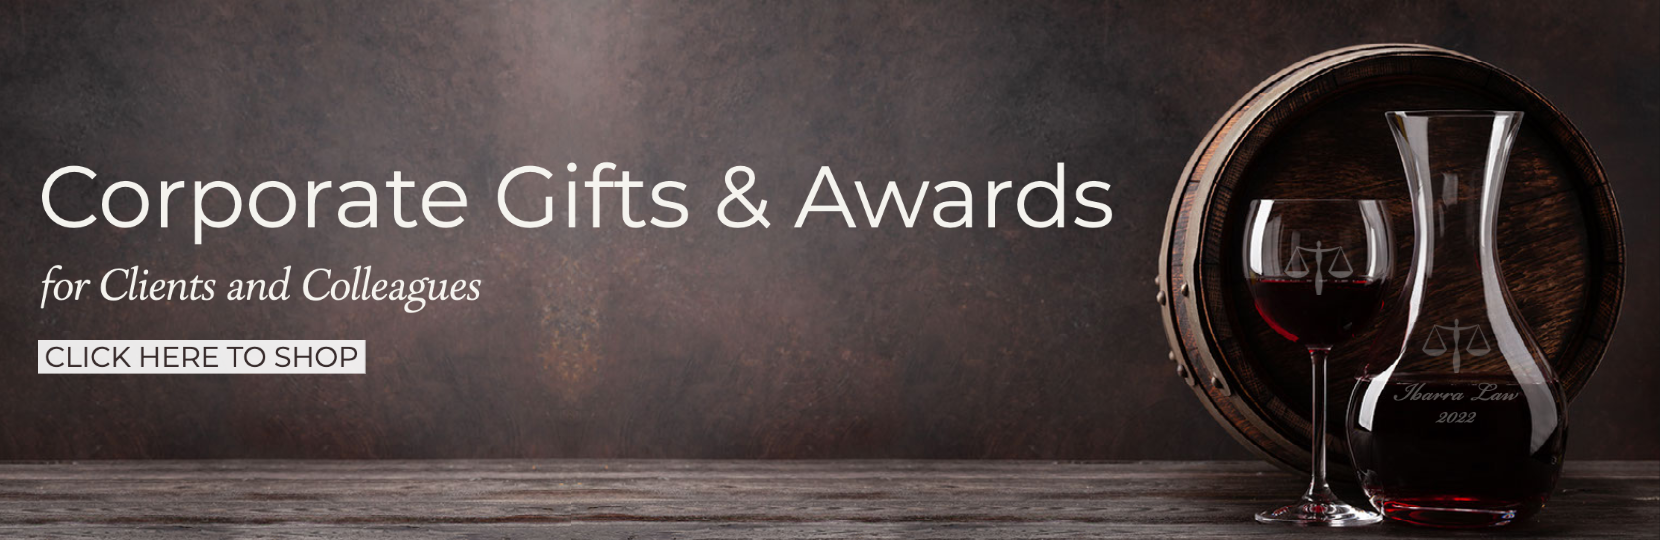 Corporate Gifts and Awards